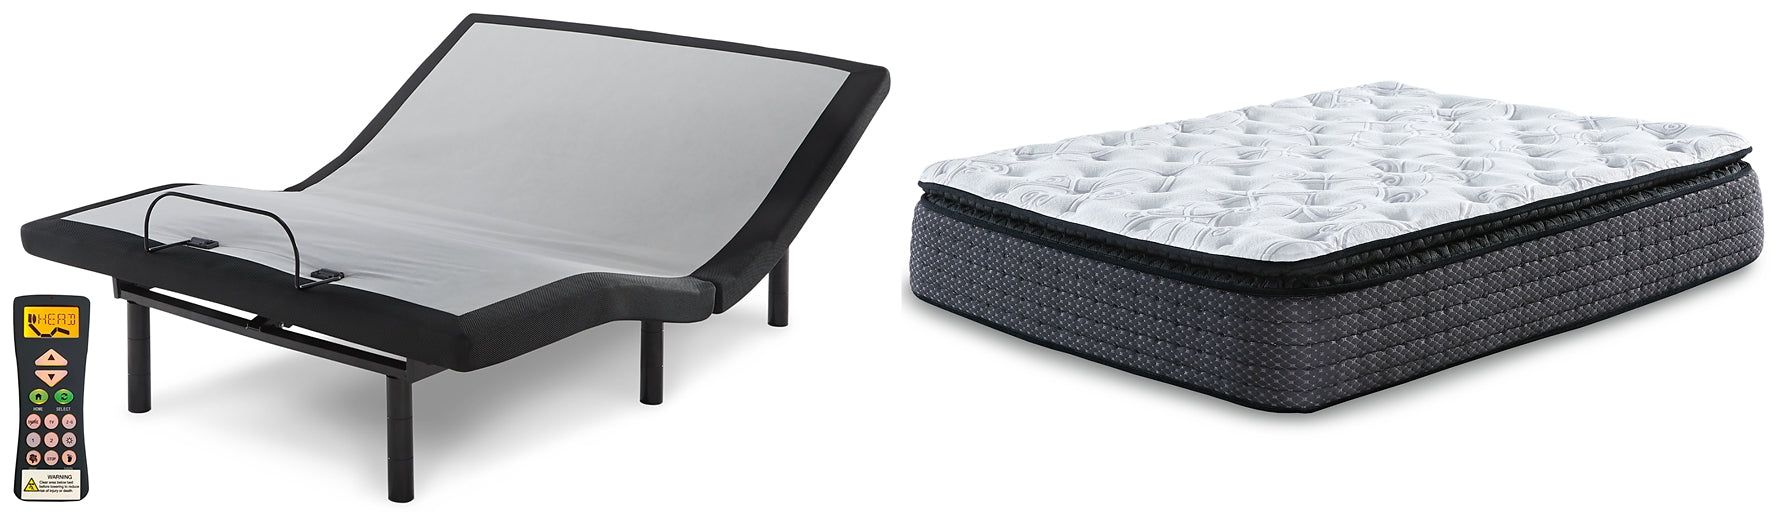 Limited Edition Pillowtop Mattress with Adjustable Base